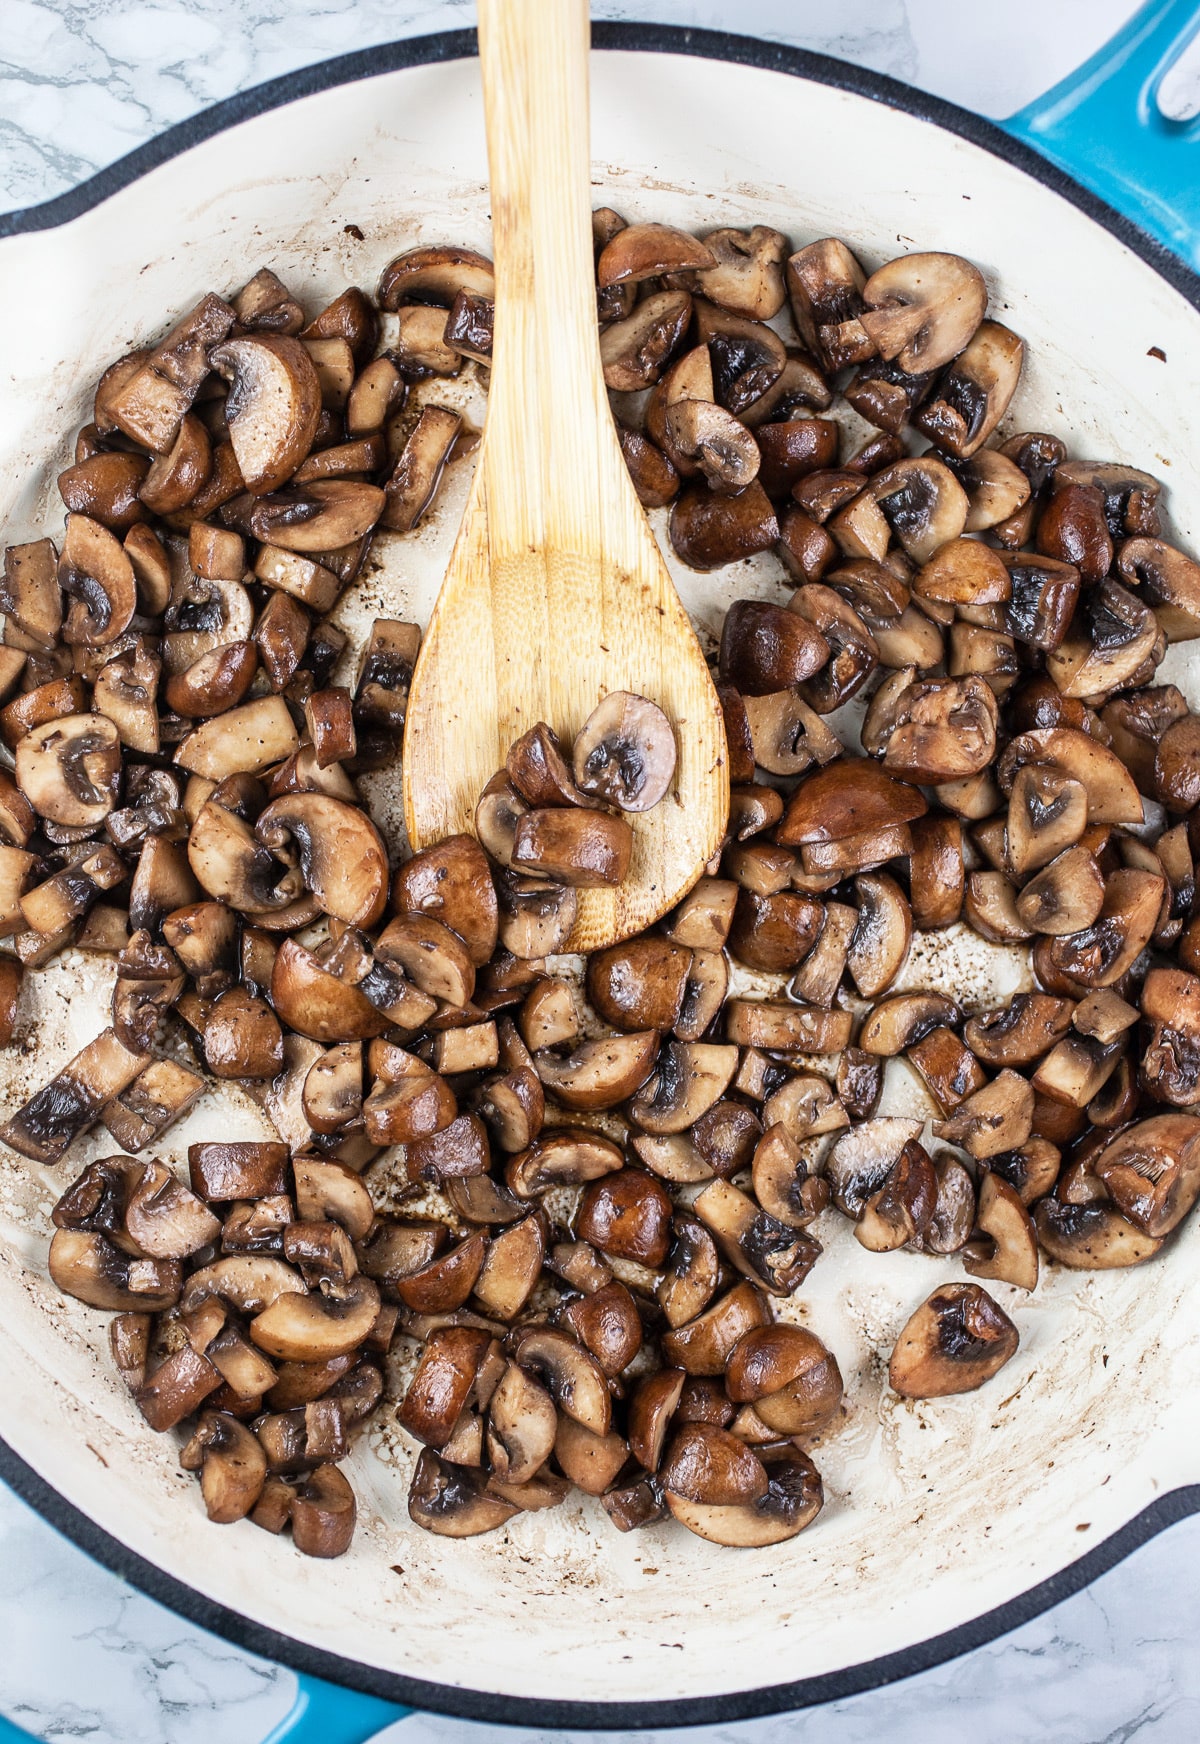 Sautéed mushrooms in skillet with wooden spoon.